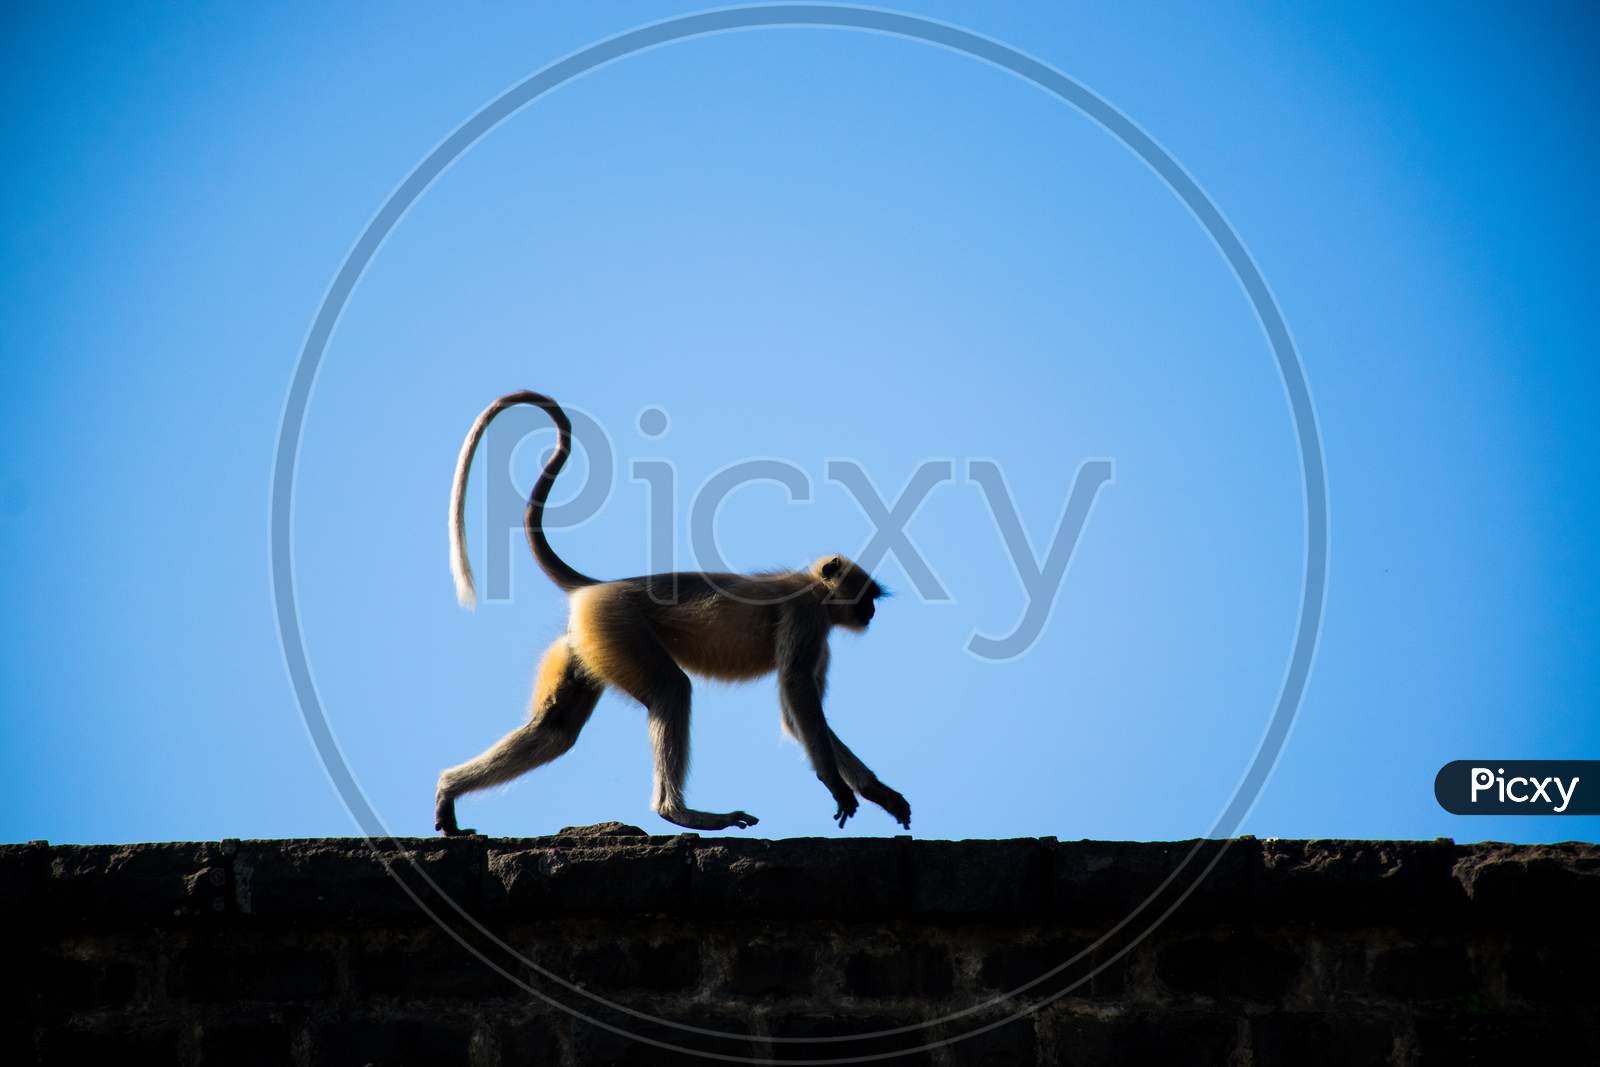 A Langur Running On A Wall In Maharashtra, India